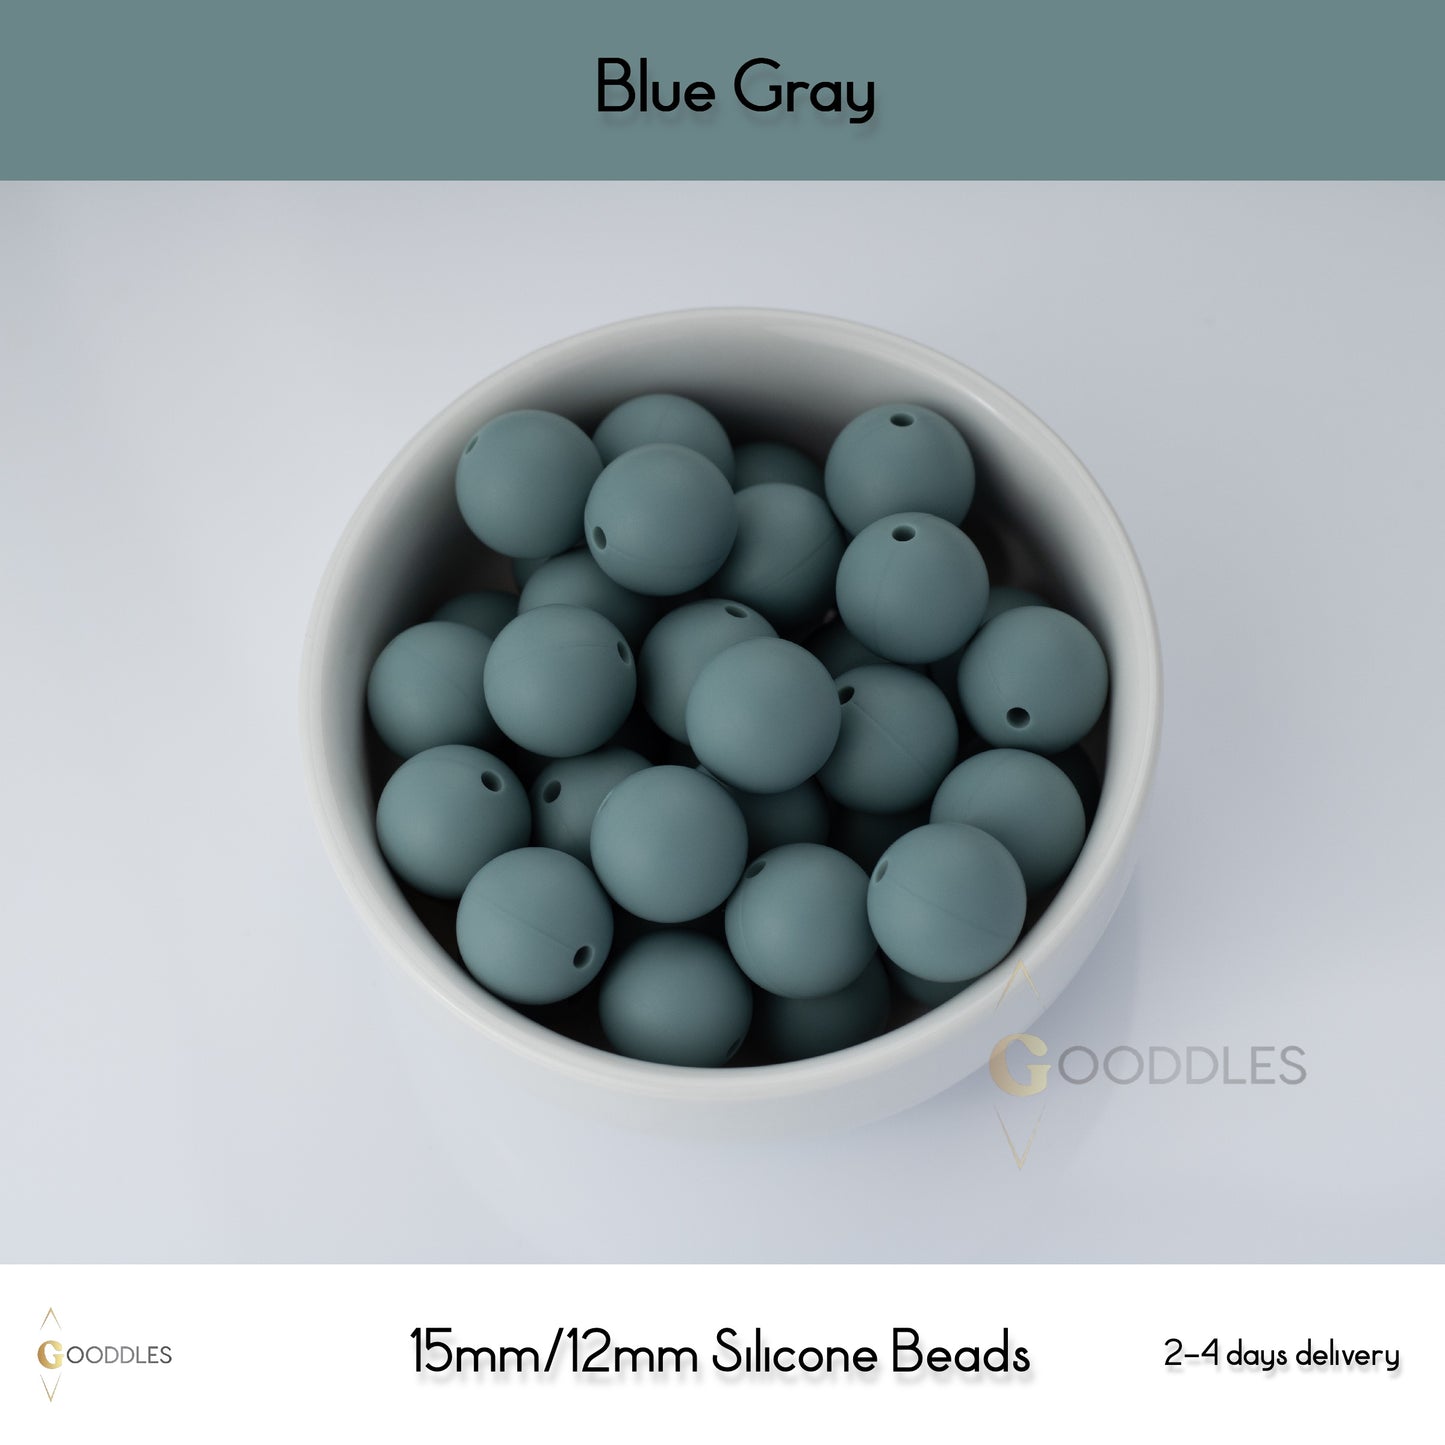 5pcs, Blue Gray Silicone Beads Round Silicone Beads